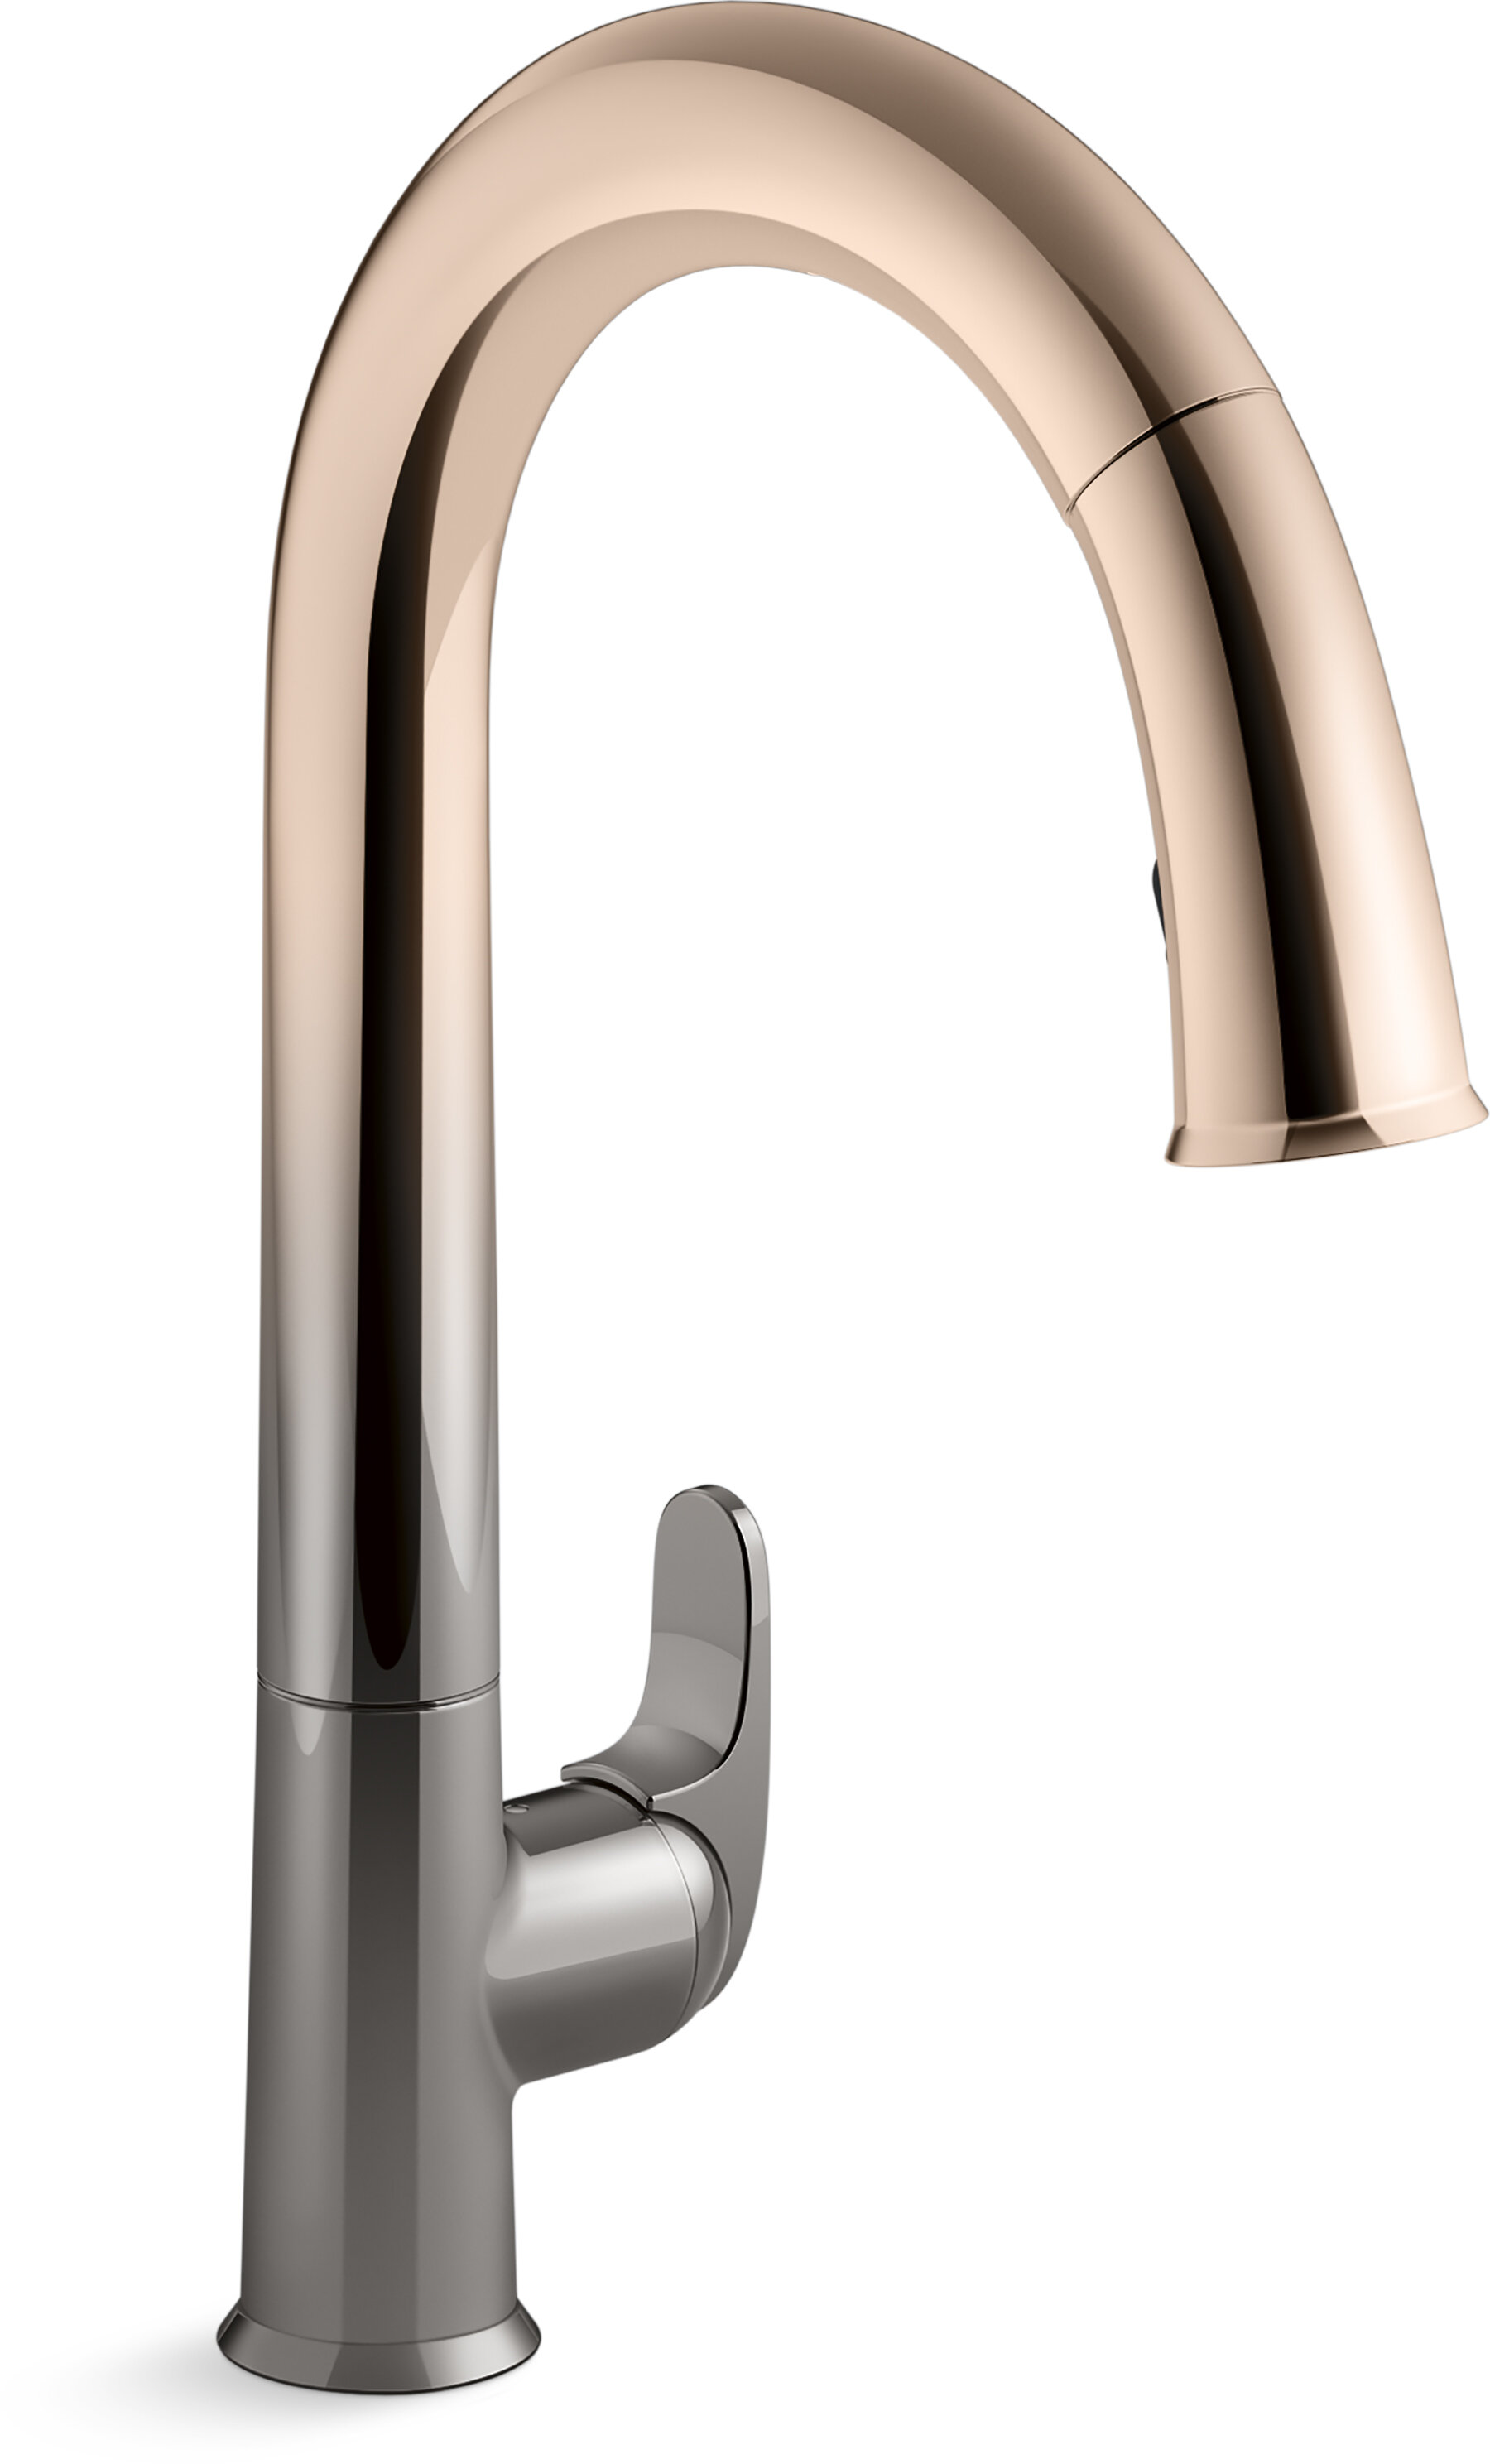 Kohler Sensate Touchless Kitchen Faucet With 15 1 2 In Pull Down Spout